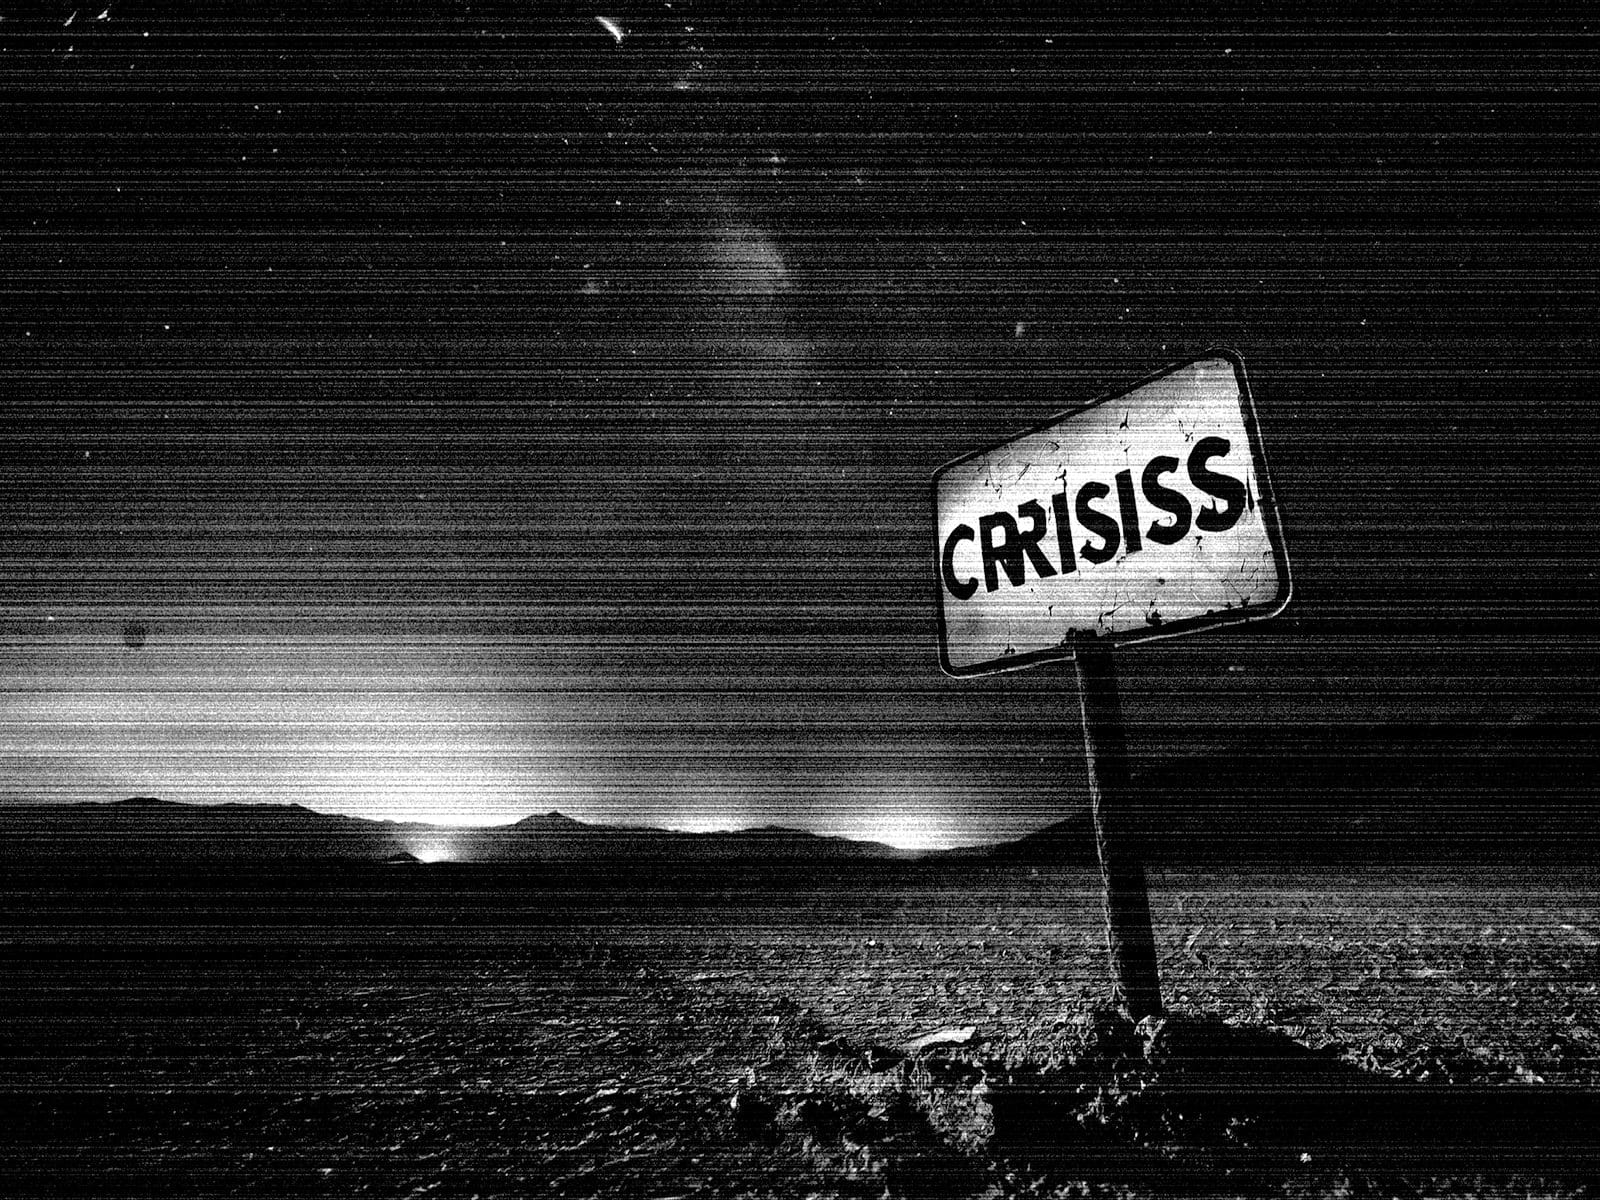 Land of perpetual crisis. (Generated in Adobe Firefly)